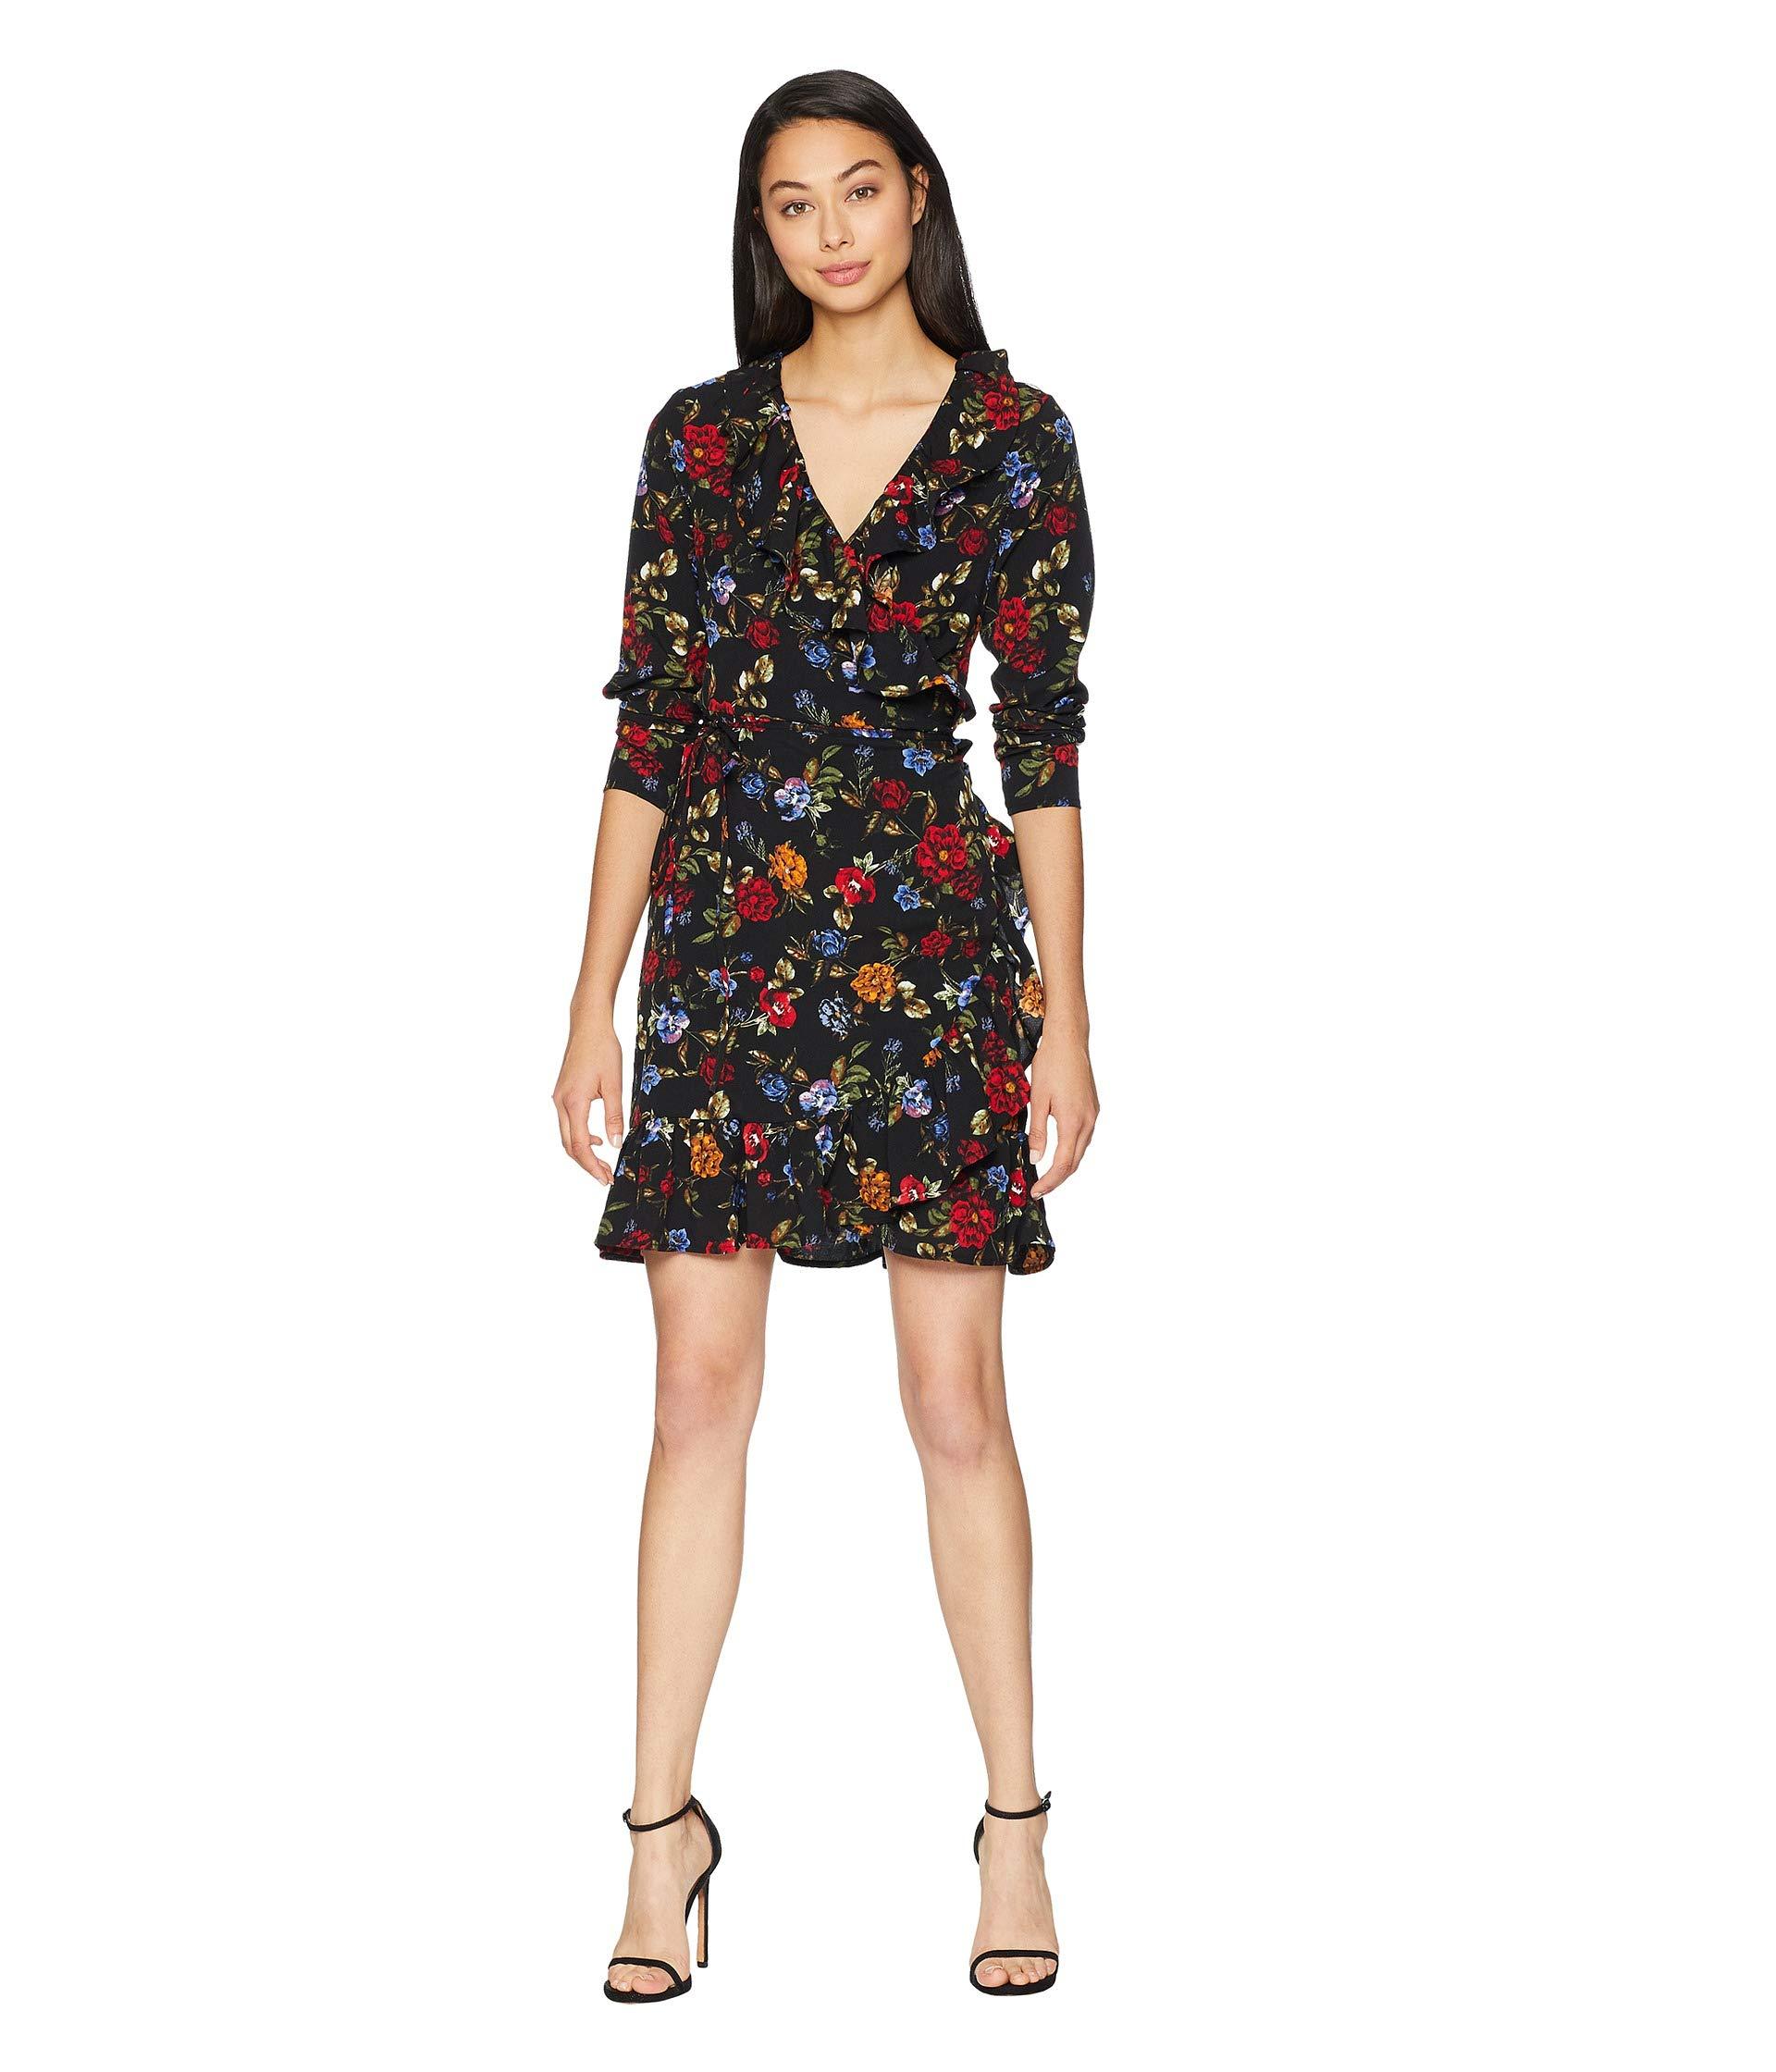 Kensie Synthetic Winter Floral Dress in Black Combo (Black) - Save 84% |  Lyst